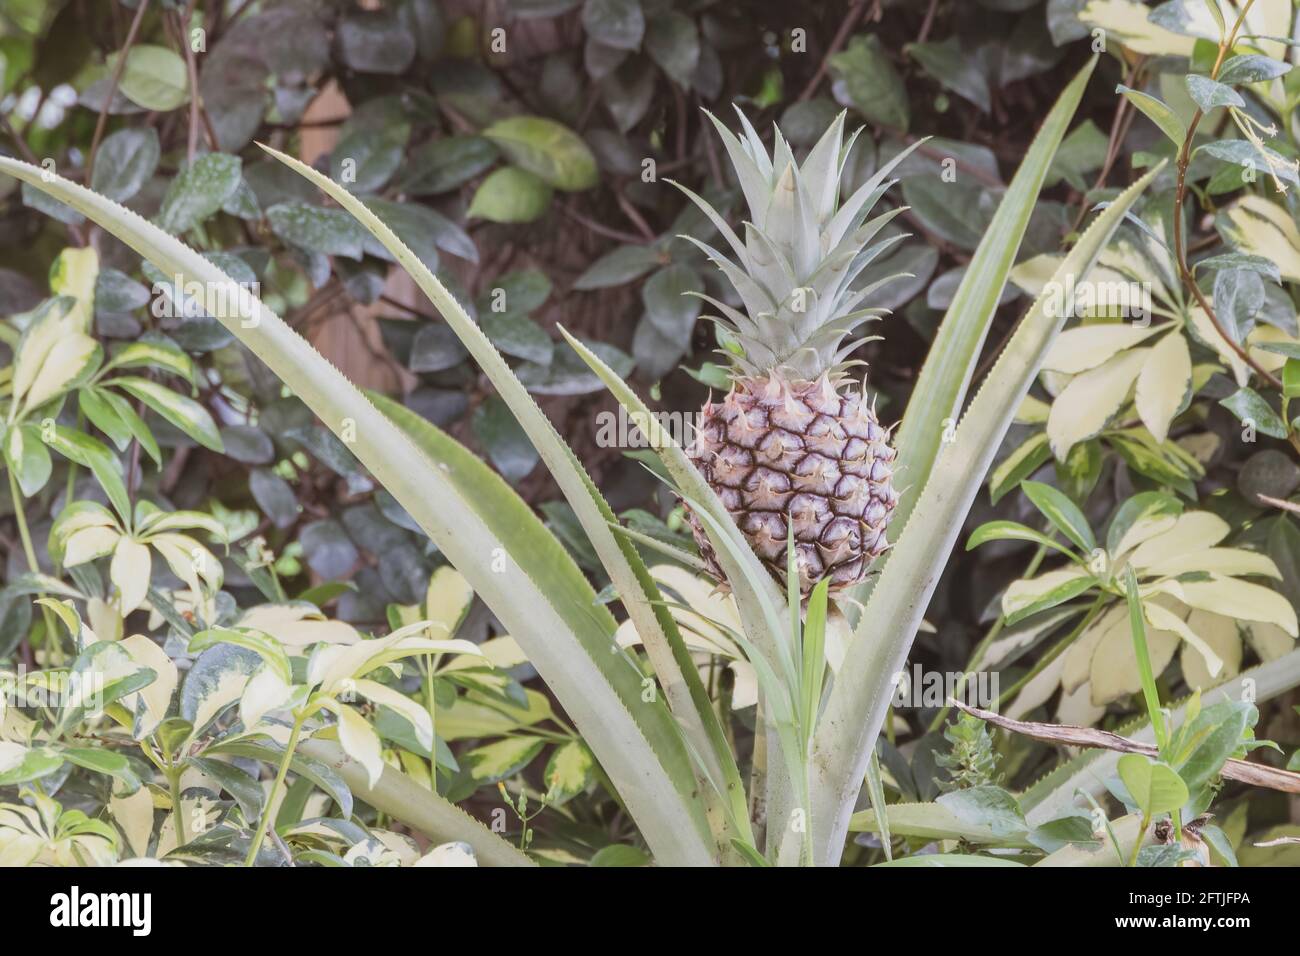 Growing pineapple aka Ananas comosus tropical plant from the Bromeliaceae  family. South American cultivated in Palm Beach Florida near Broward County  Stock Photo - Alamy